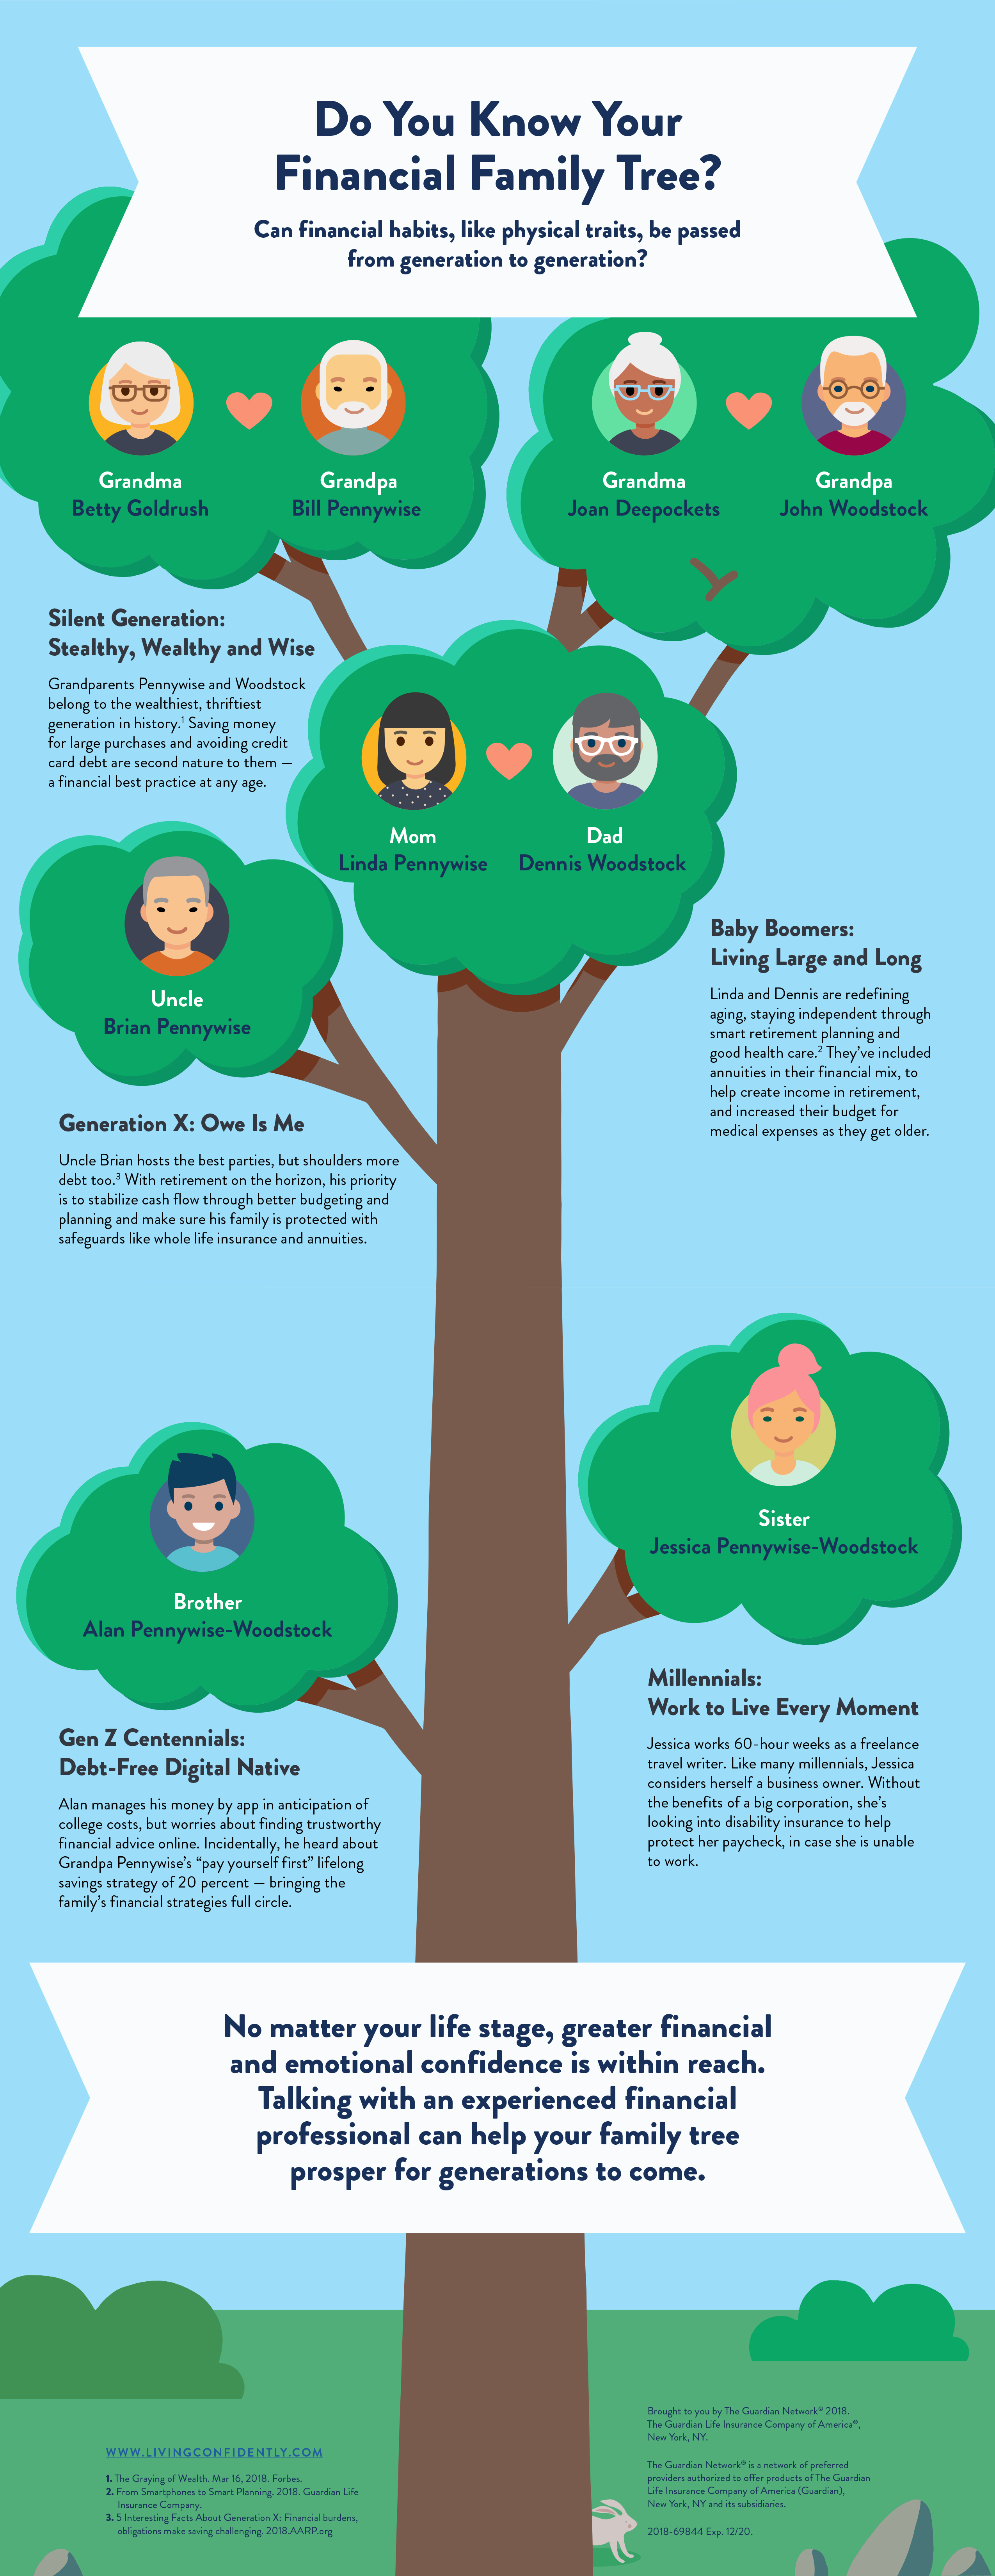 How To Make Your Own Family Tree - ThinkTV